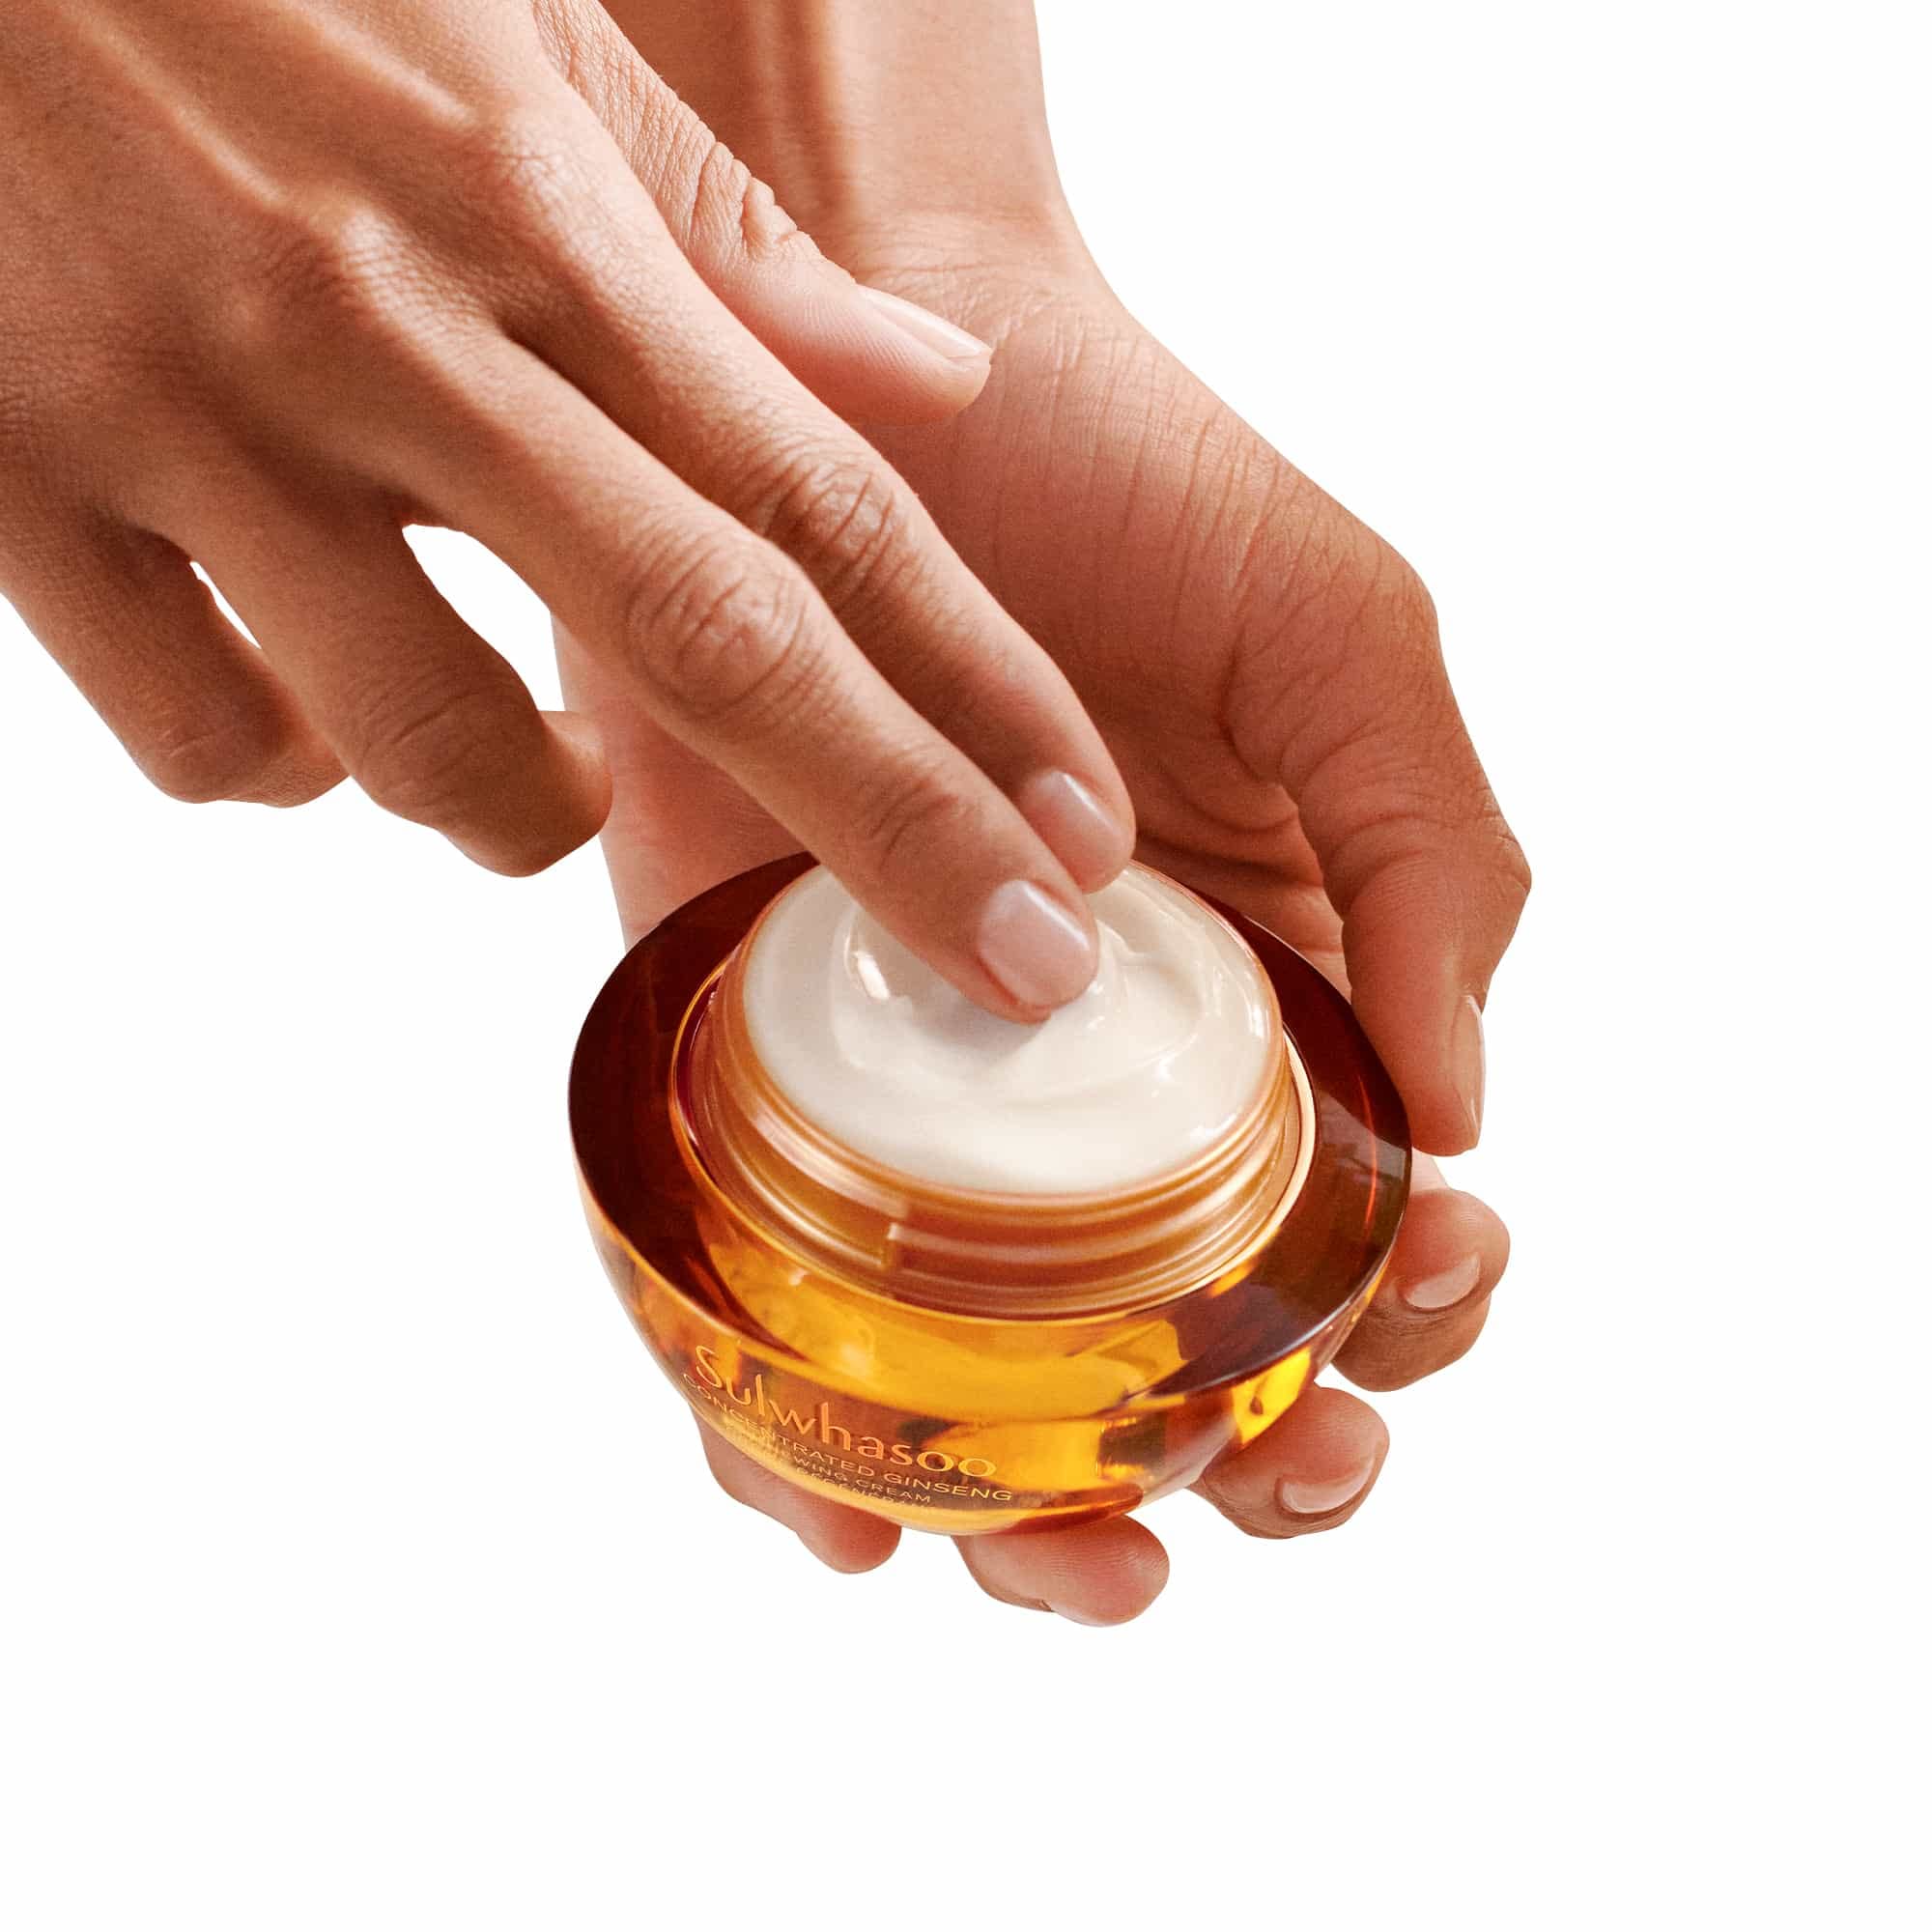 Sulwhasoo Concentrated Ginseng Renewing Cream: Silk Cream to Hydrate, Visibly Firm, and Soften Look of Lines & Wrinkles